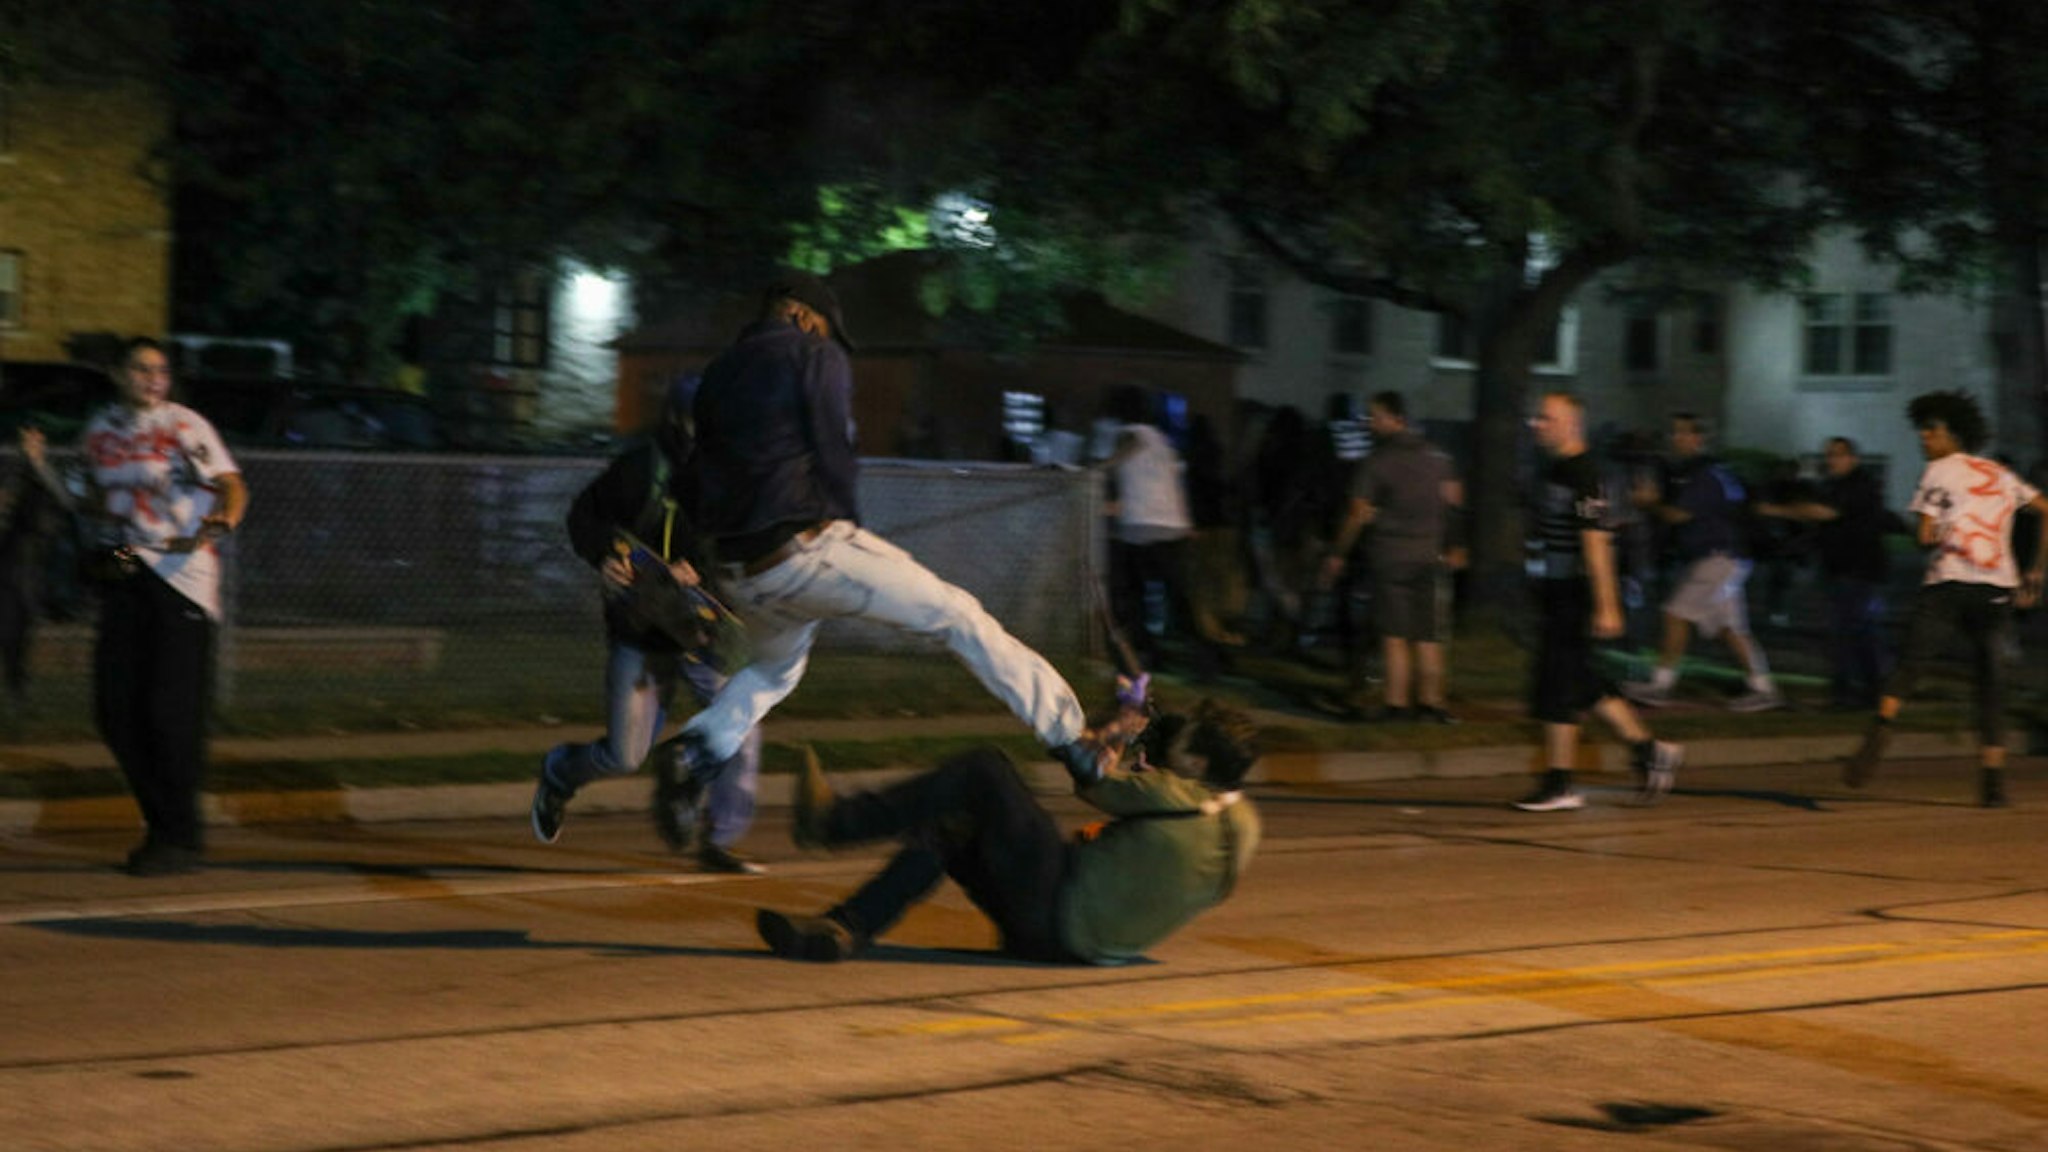 KENOSHA, WISCONSIN, USA - AUGUST 25: (EDITORS NOTE: Image contains graphic content.) A protester clashes with armed civilian Kyle Rittenhouse during confrontations between protesters and armed civilians, who claimed to protect the streets of Kenosha against the arson, during the third day of protests over the shooting of a black man Jacob Blake by police officer in Wisconsin, United States on August 25, 2020. Kyle Rittenhouse has been charged by Wisconsin prosecutors with the killing of Anthony Huber, 26 and Joseph Rosenbaum, 36 and the injuring of Gaige Grosskreutz, also 26.